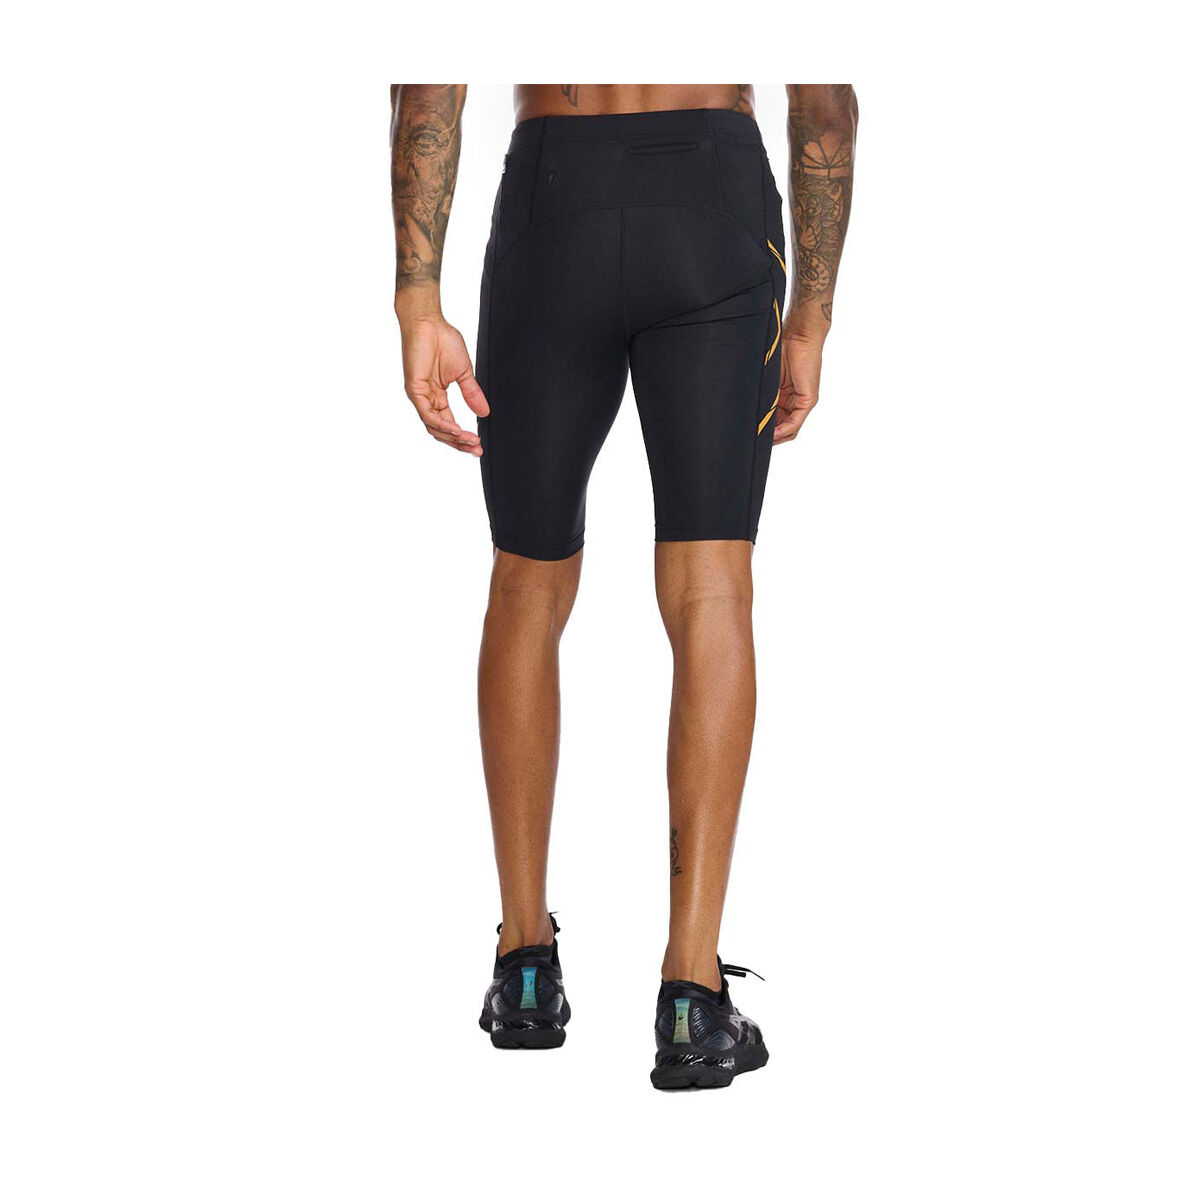 2XU Men's Light Speed Compression Shorts for Running and Active Sports 